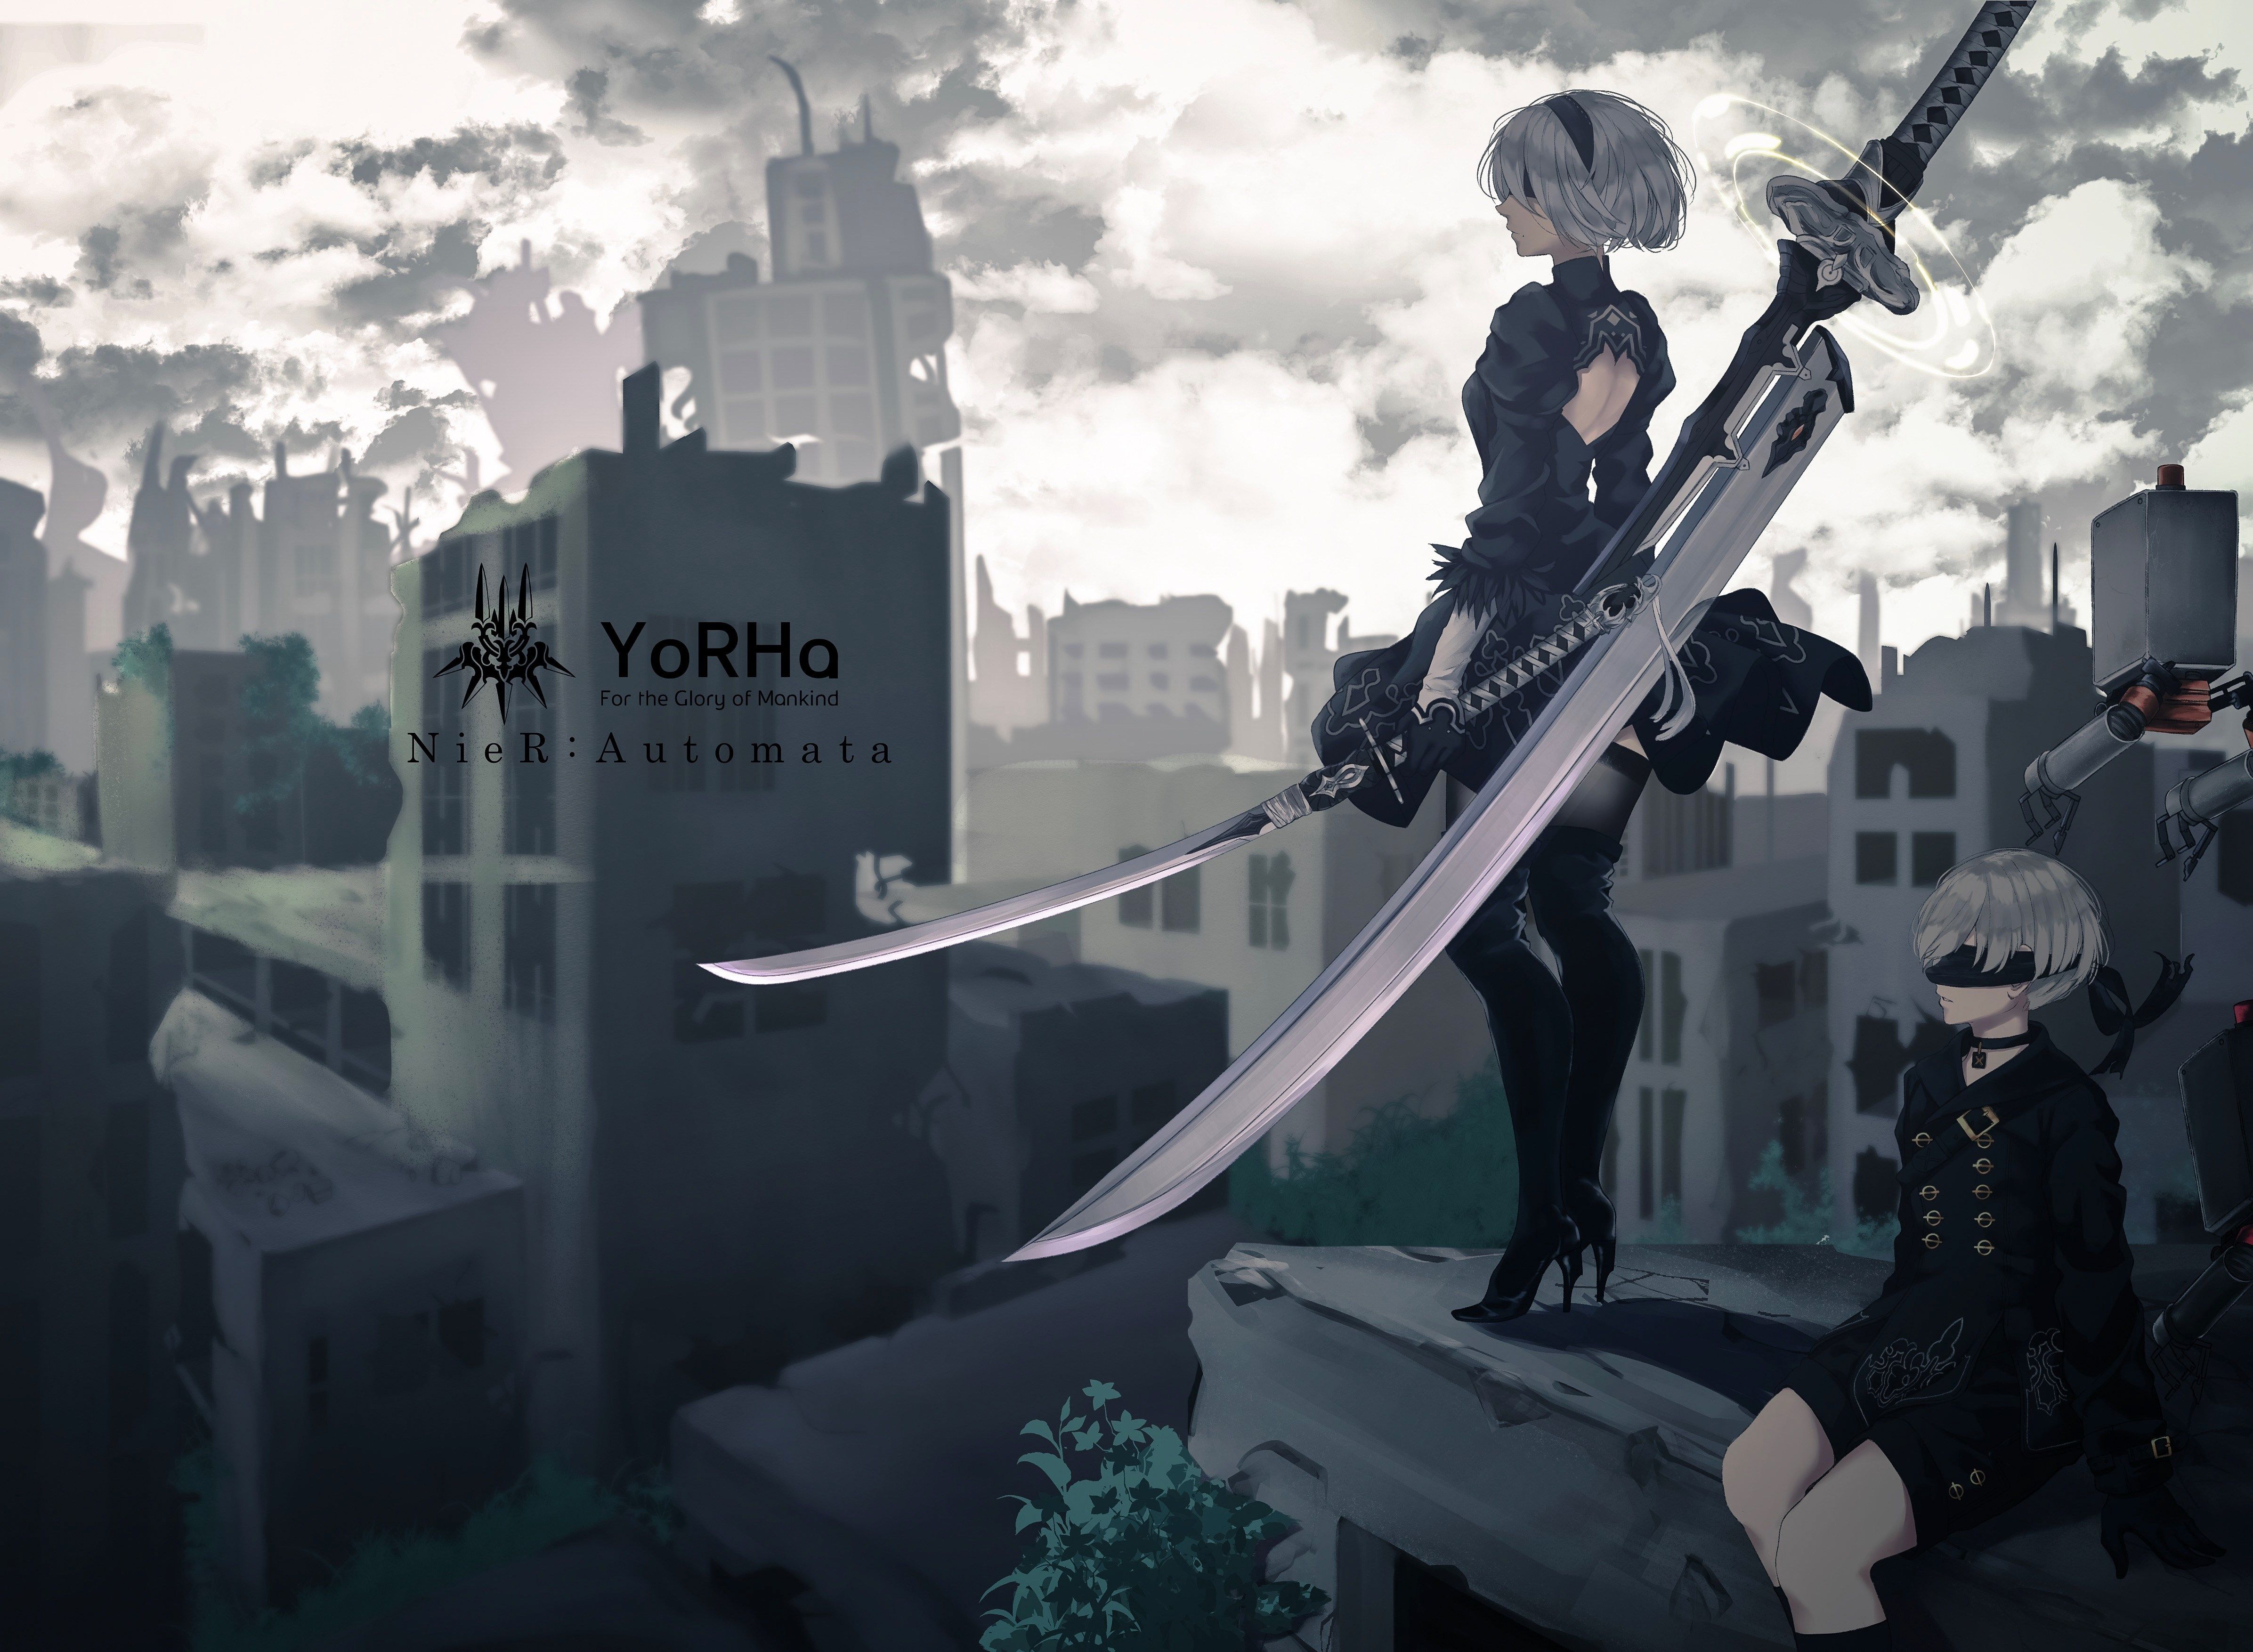 Background In High Quality automata. Nier